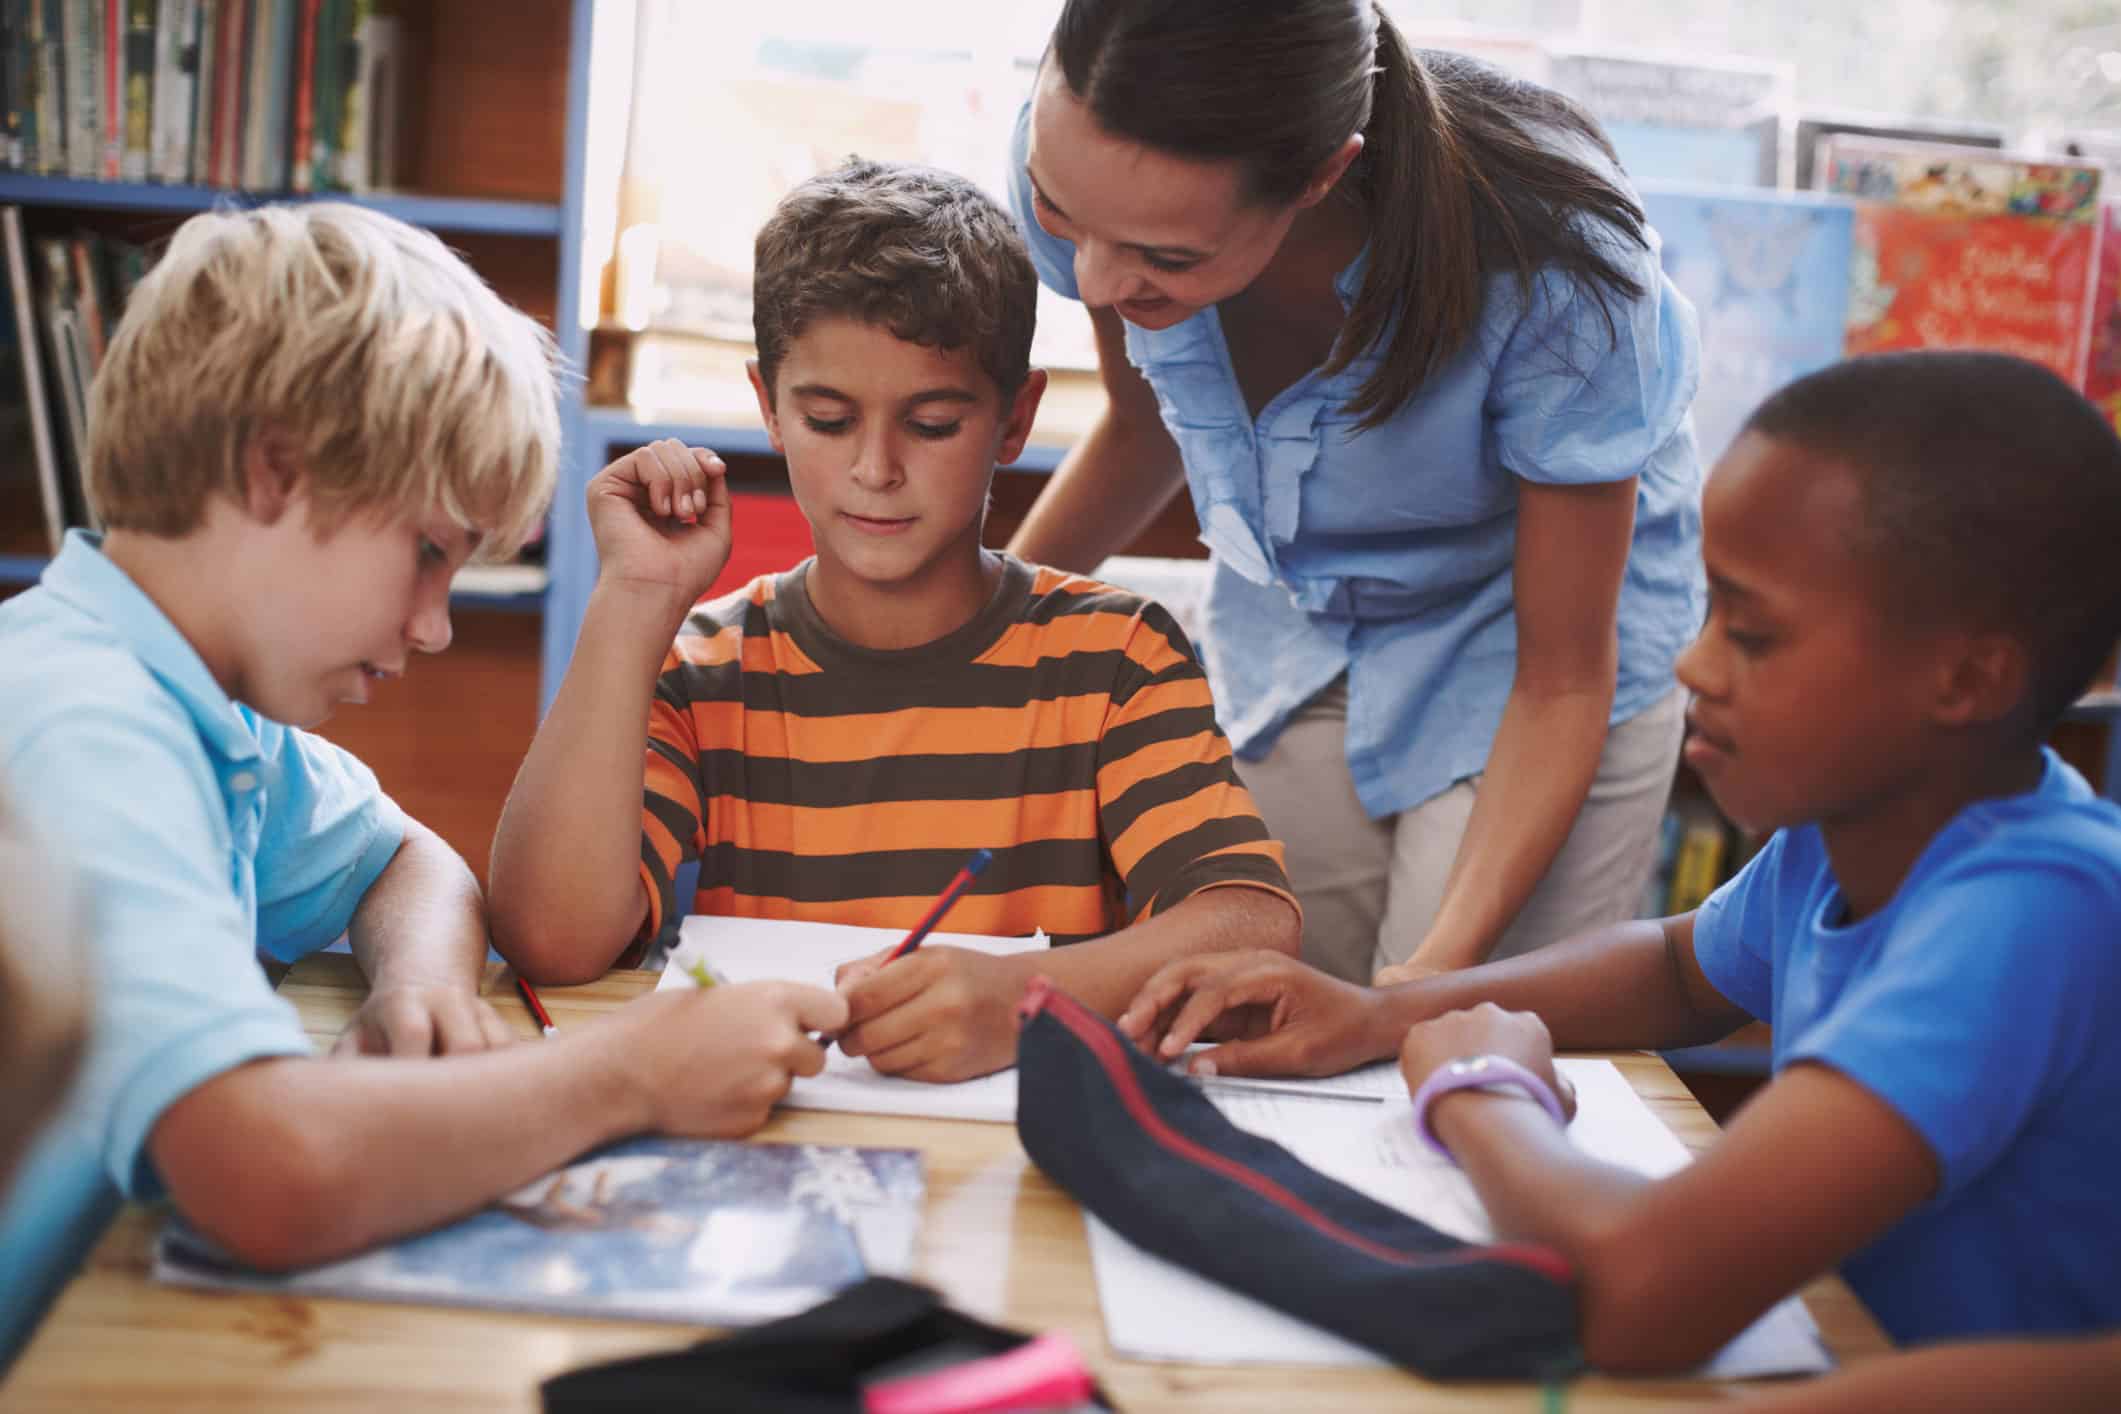 teacher in blue shirt smiles at boy with striped shirt and two other students